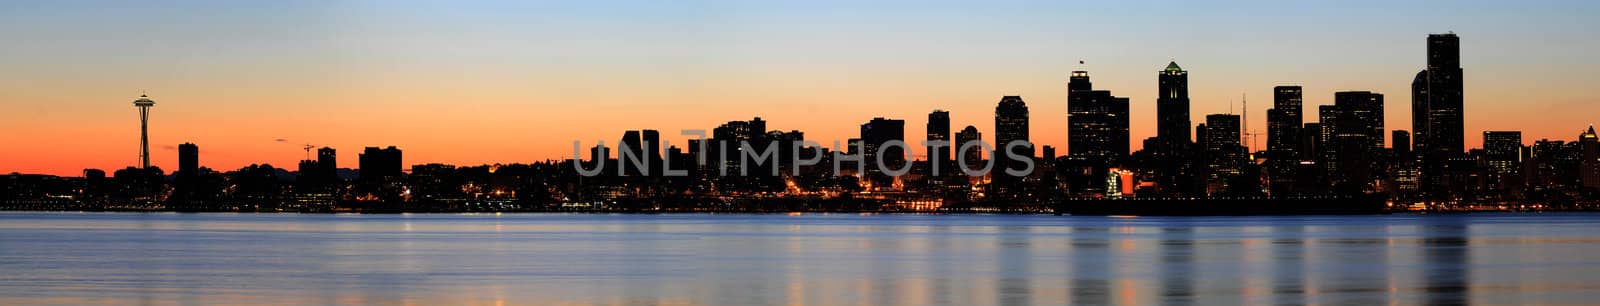 Seattle Skyline and Puget Sound at Sunrise by Davidgn